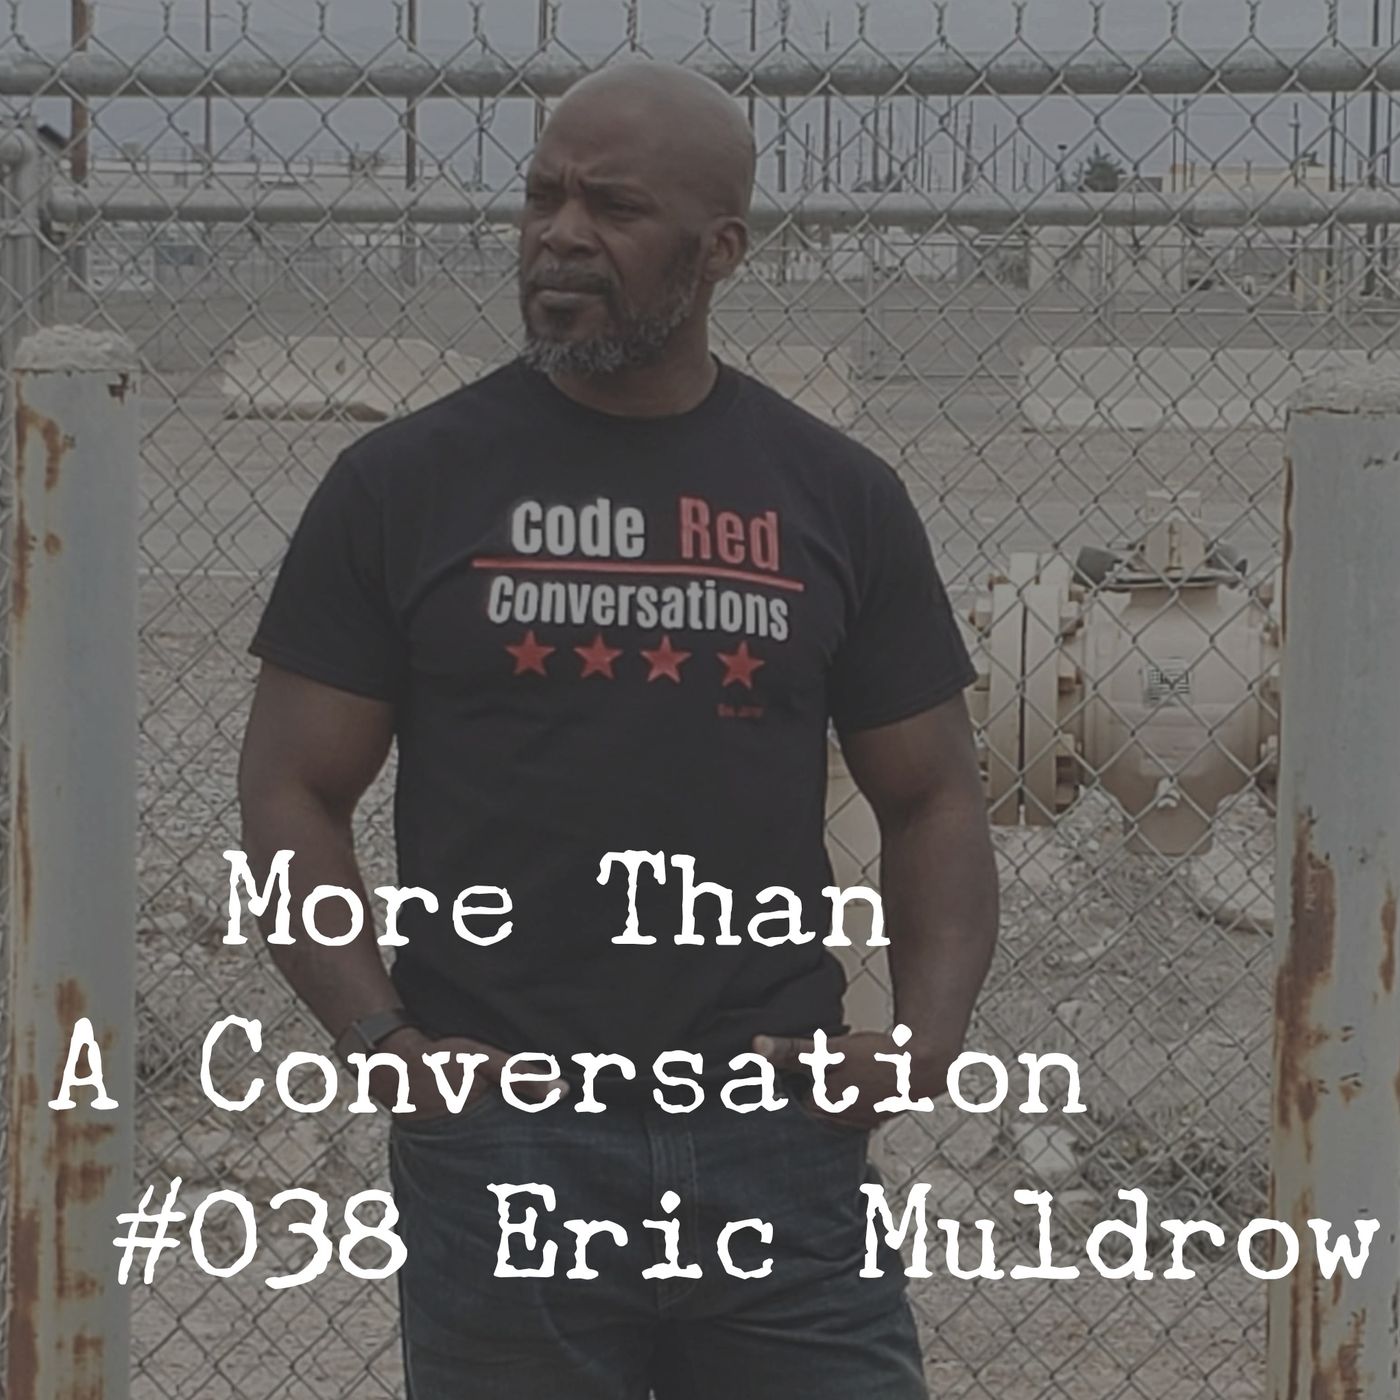 #038 Eric Muldrow, Code Red Conversations